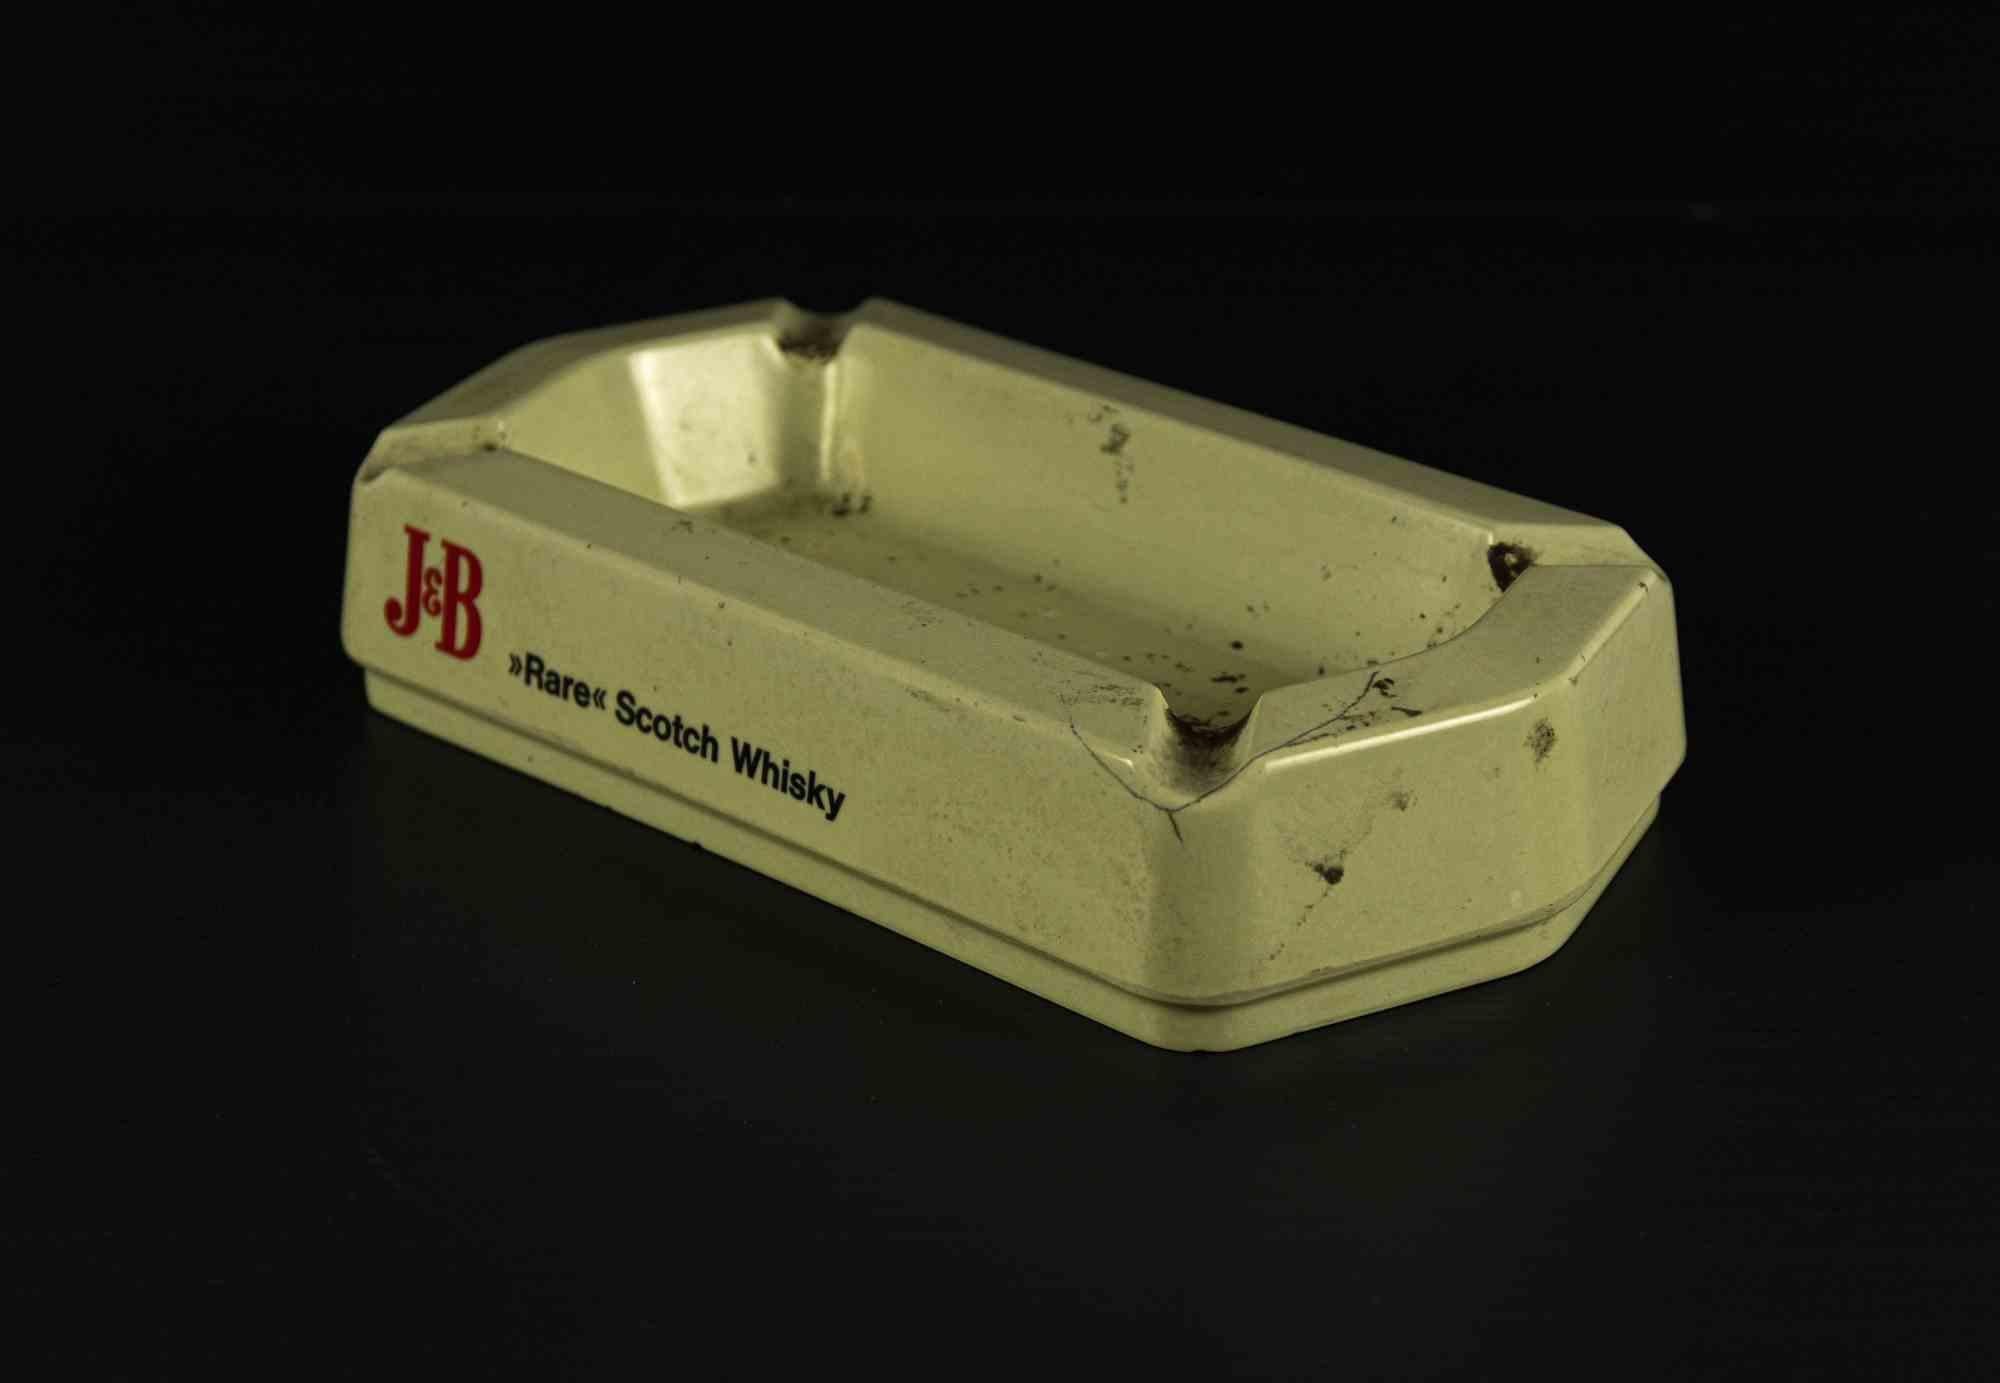 Vintage J&B whisky ashtray is an original decorative object realized in the 1960s.

A vintage plastic ashtray realized by J&B Scotch Whisky as reported on both sides.

Produced by Crippa Milano (as reported under the base).

Mint condition